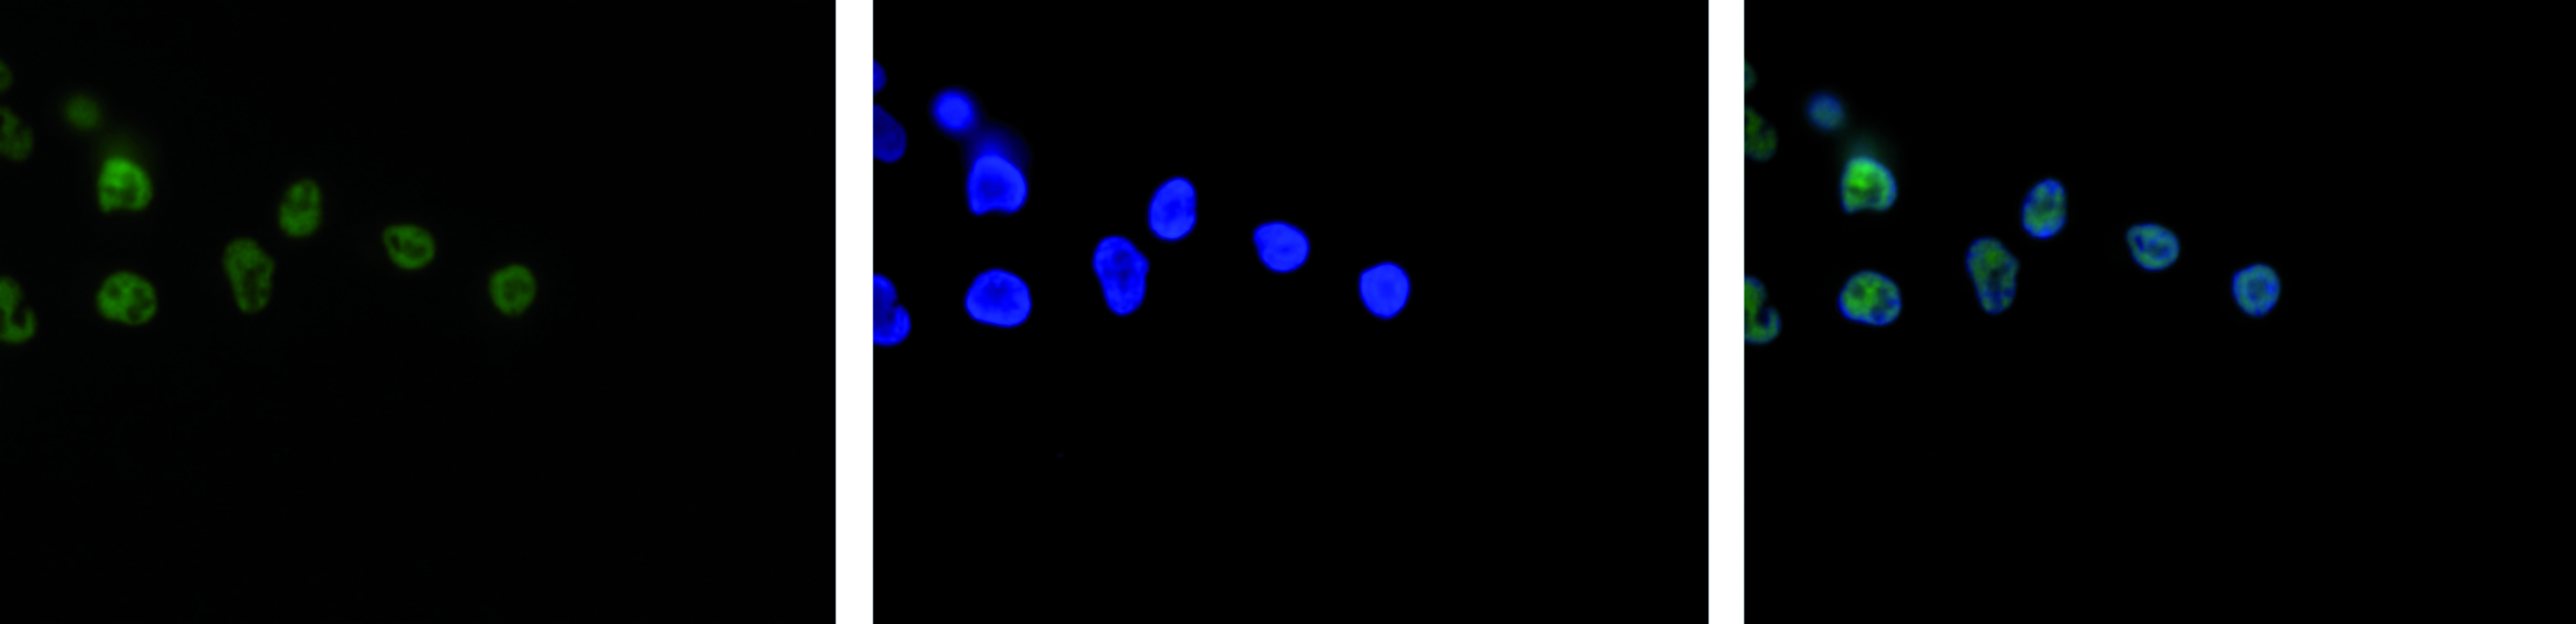 HeLa cells were stained with the H3K4me3 antibody (bs-53034R) and with DAPI. Cells were fixed with 4% formaldehyde for 10’ and blocked with PBS/TX-100 containing 5% normal goat serum and 1% BSA. The cells were labelled with the H3K4me3 antibody (left) diluted 1:500 in blocking solution followed by an anti-rabbit antibody conjugated to Alexa488. The middle panel shows staining of the nuclei with DAPI. A merge of the two stainings is shown on the right.